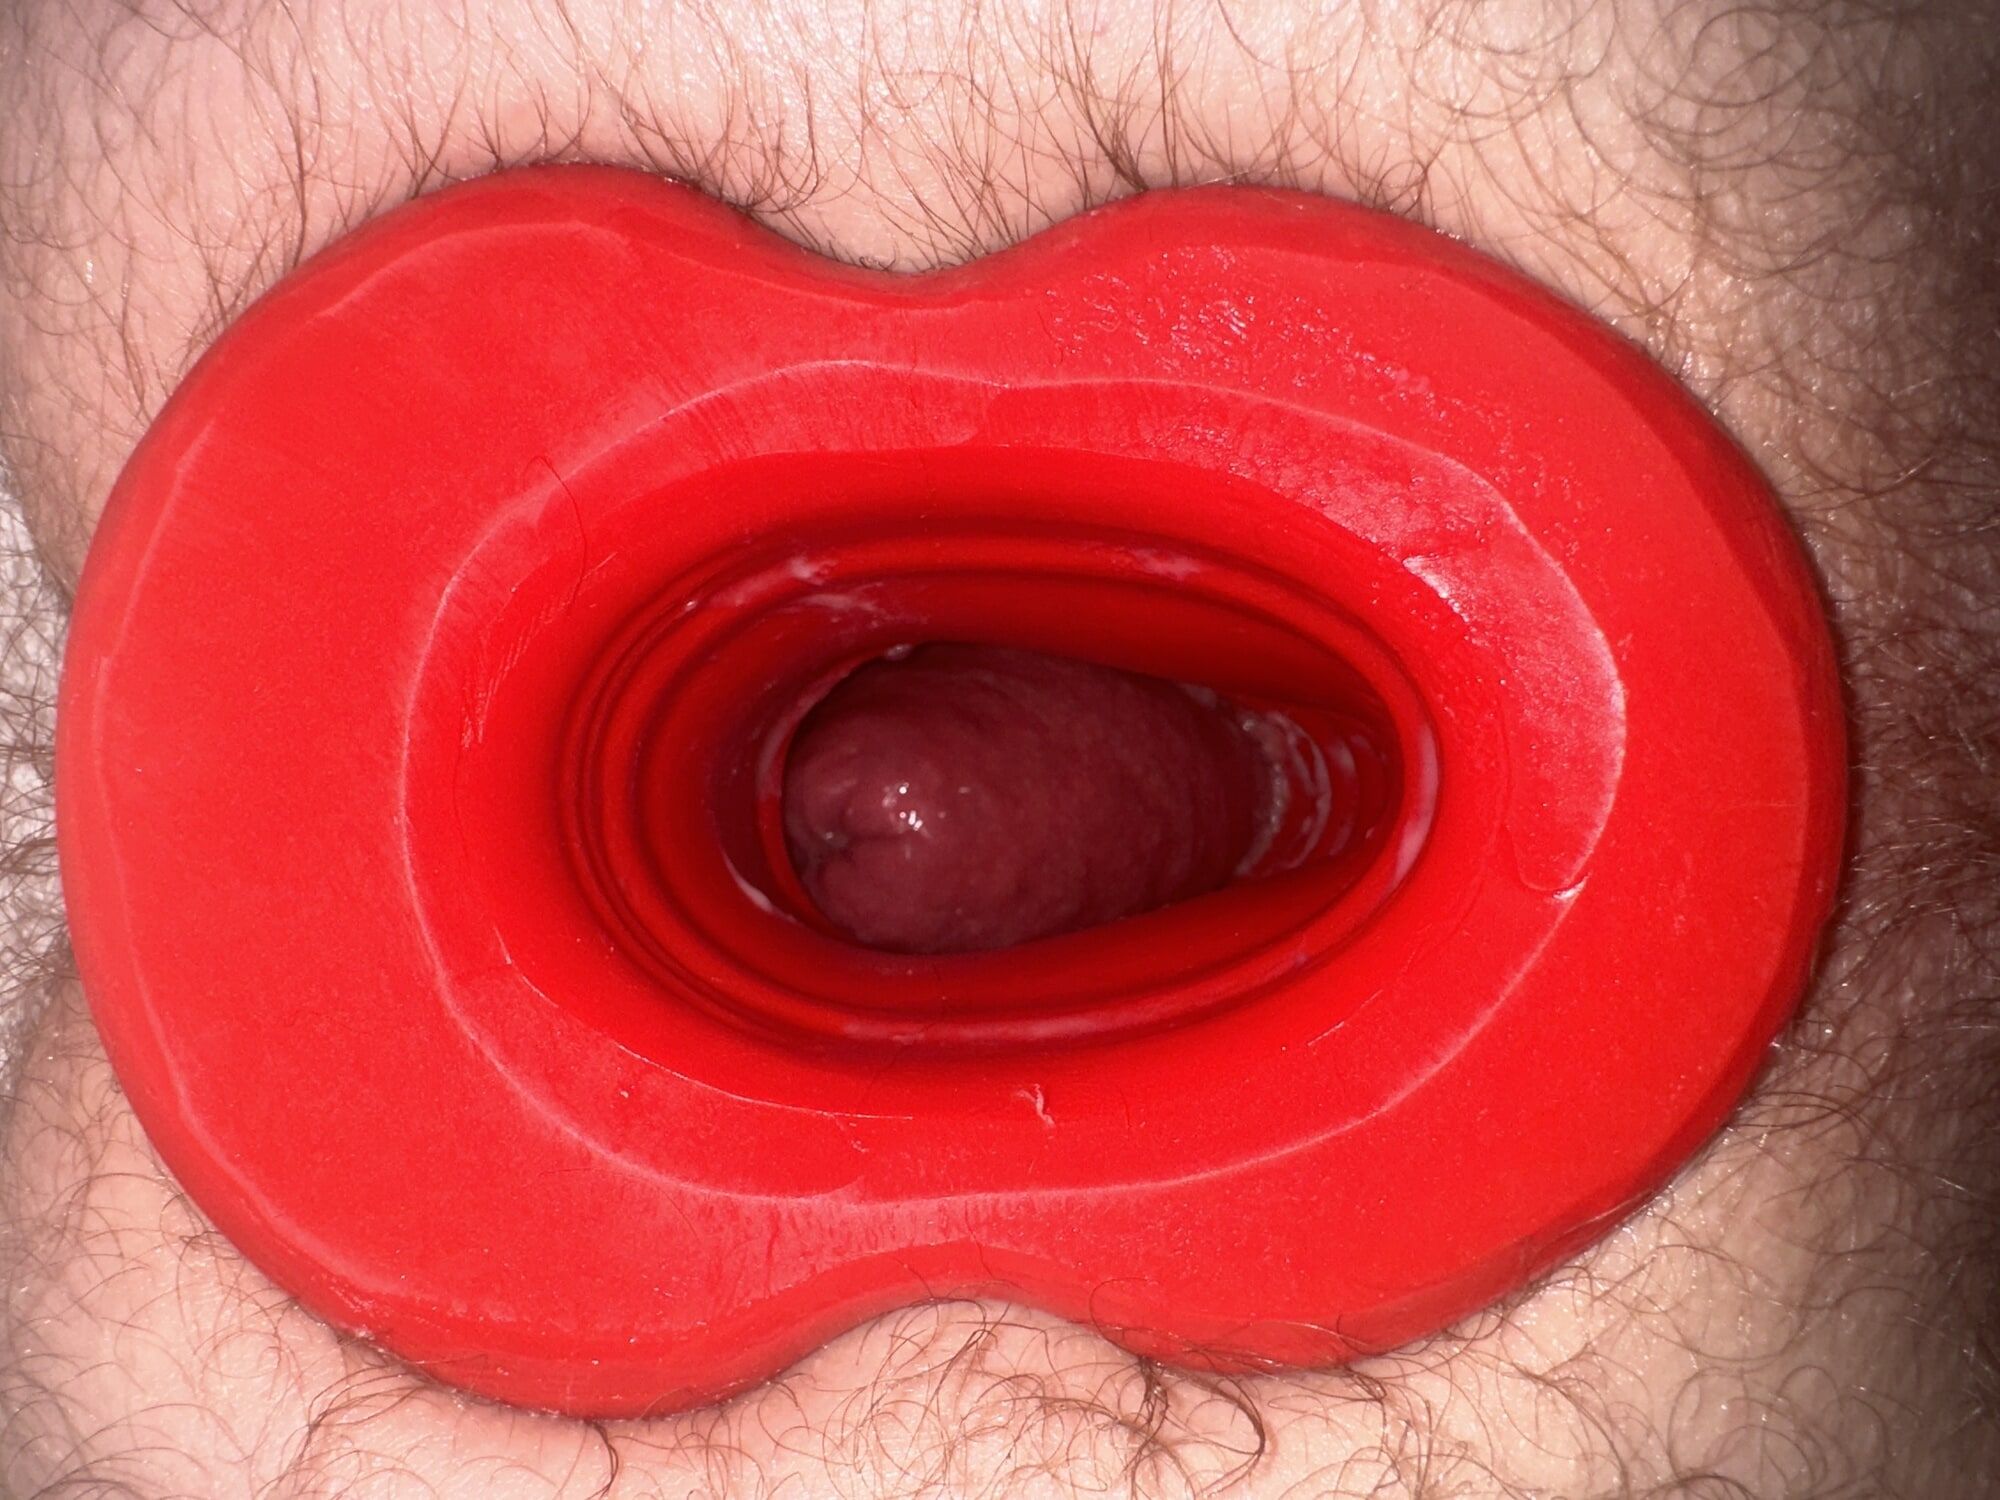 Anal prolapse in oxball ff pighole #3